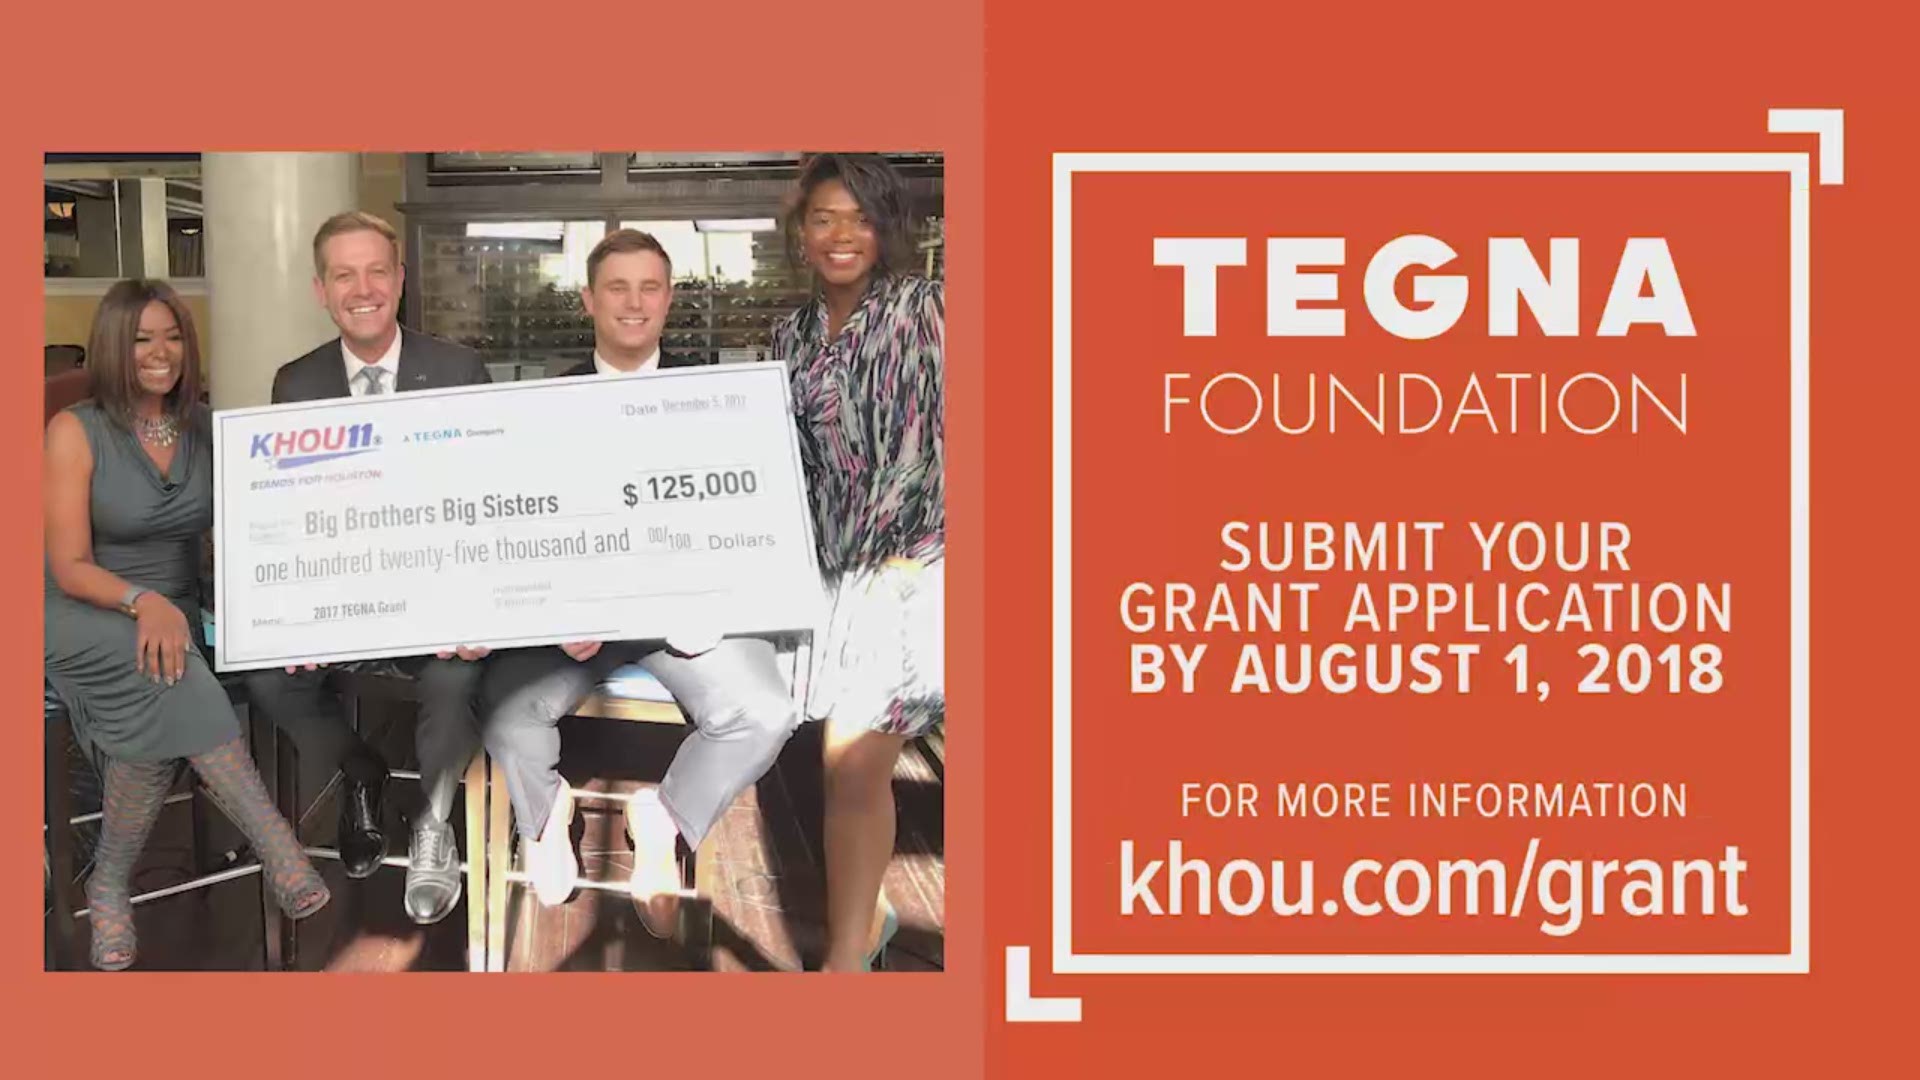 The application process is now open for local non profit organizations to apply for the 2018 TEGNA Foundation Grant awarded by KHOU 11.